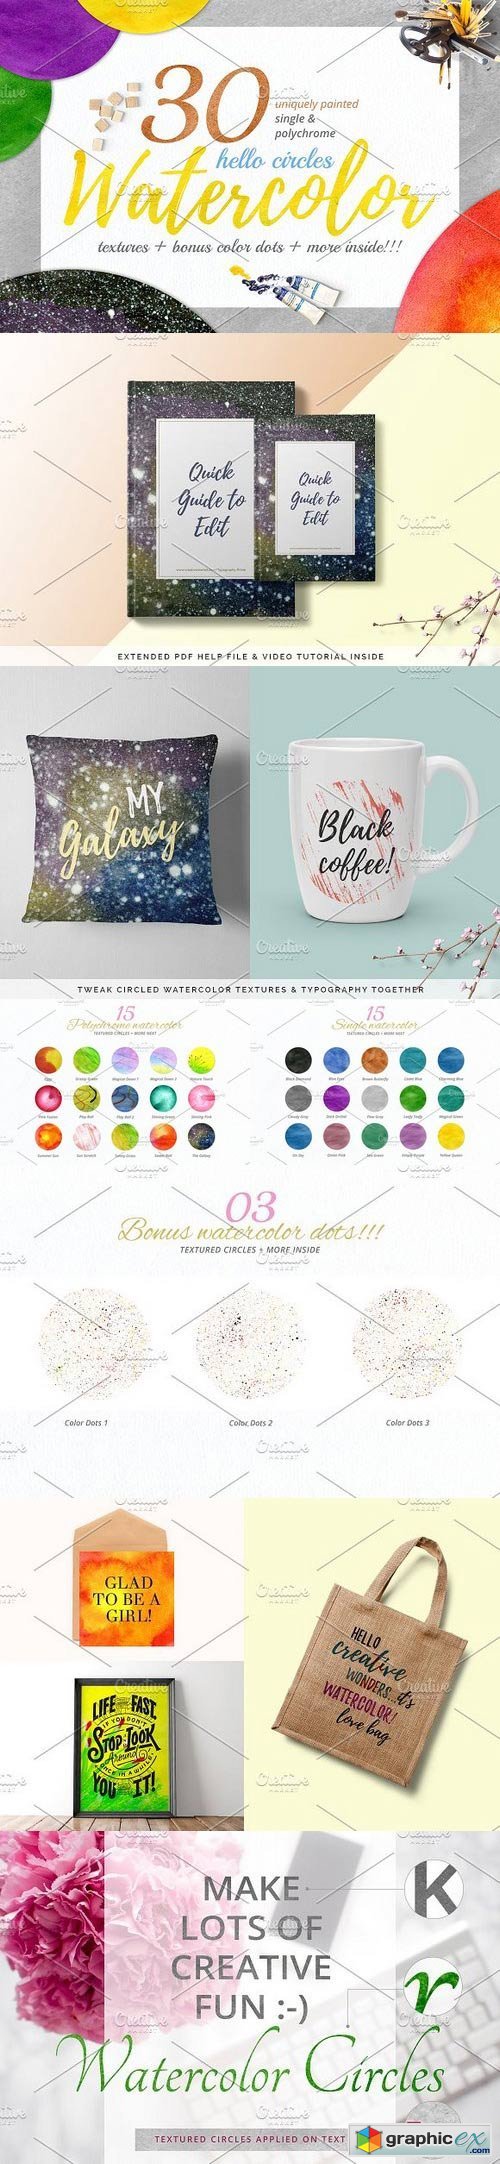 Watercolor Texture Pack